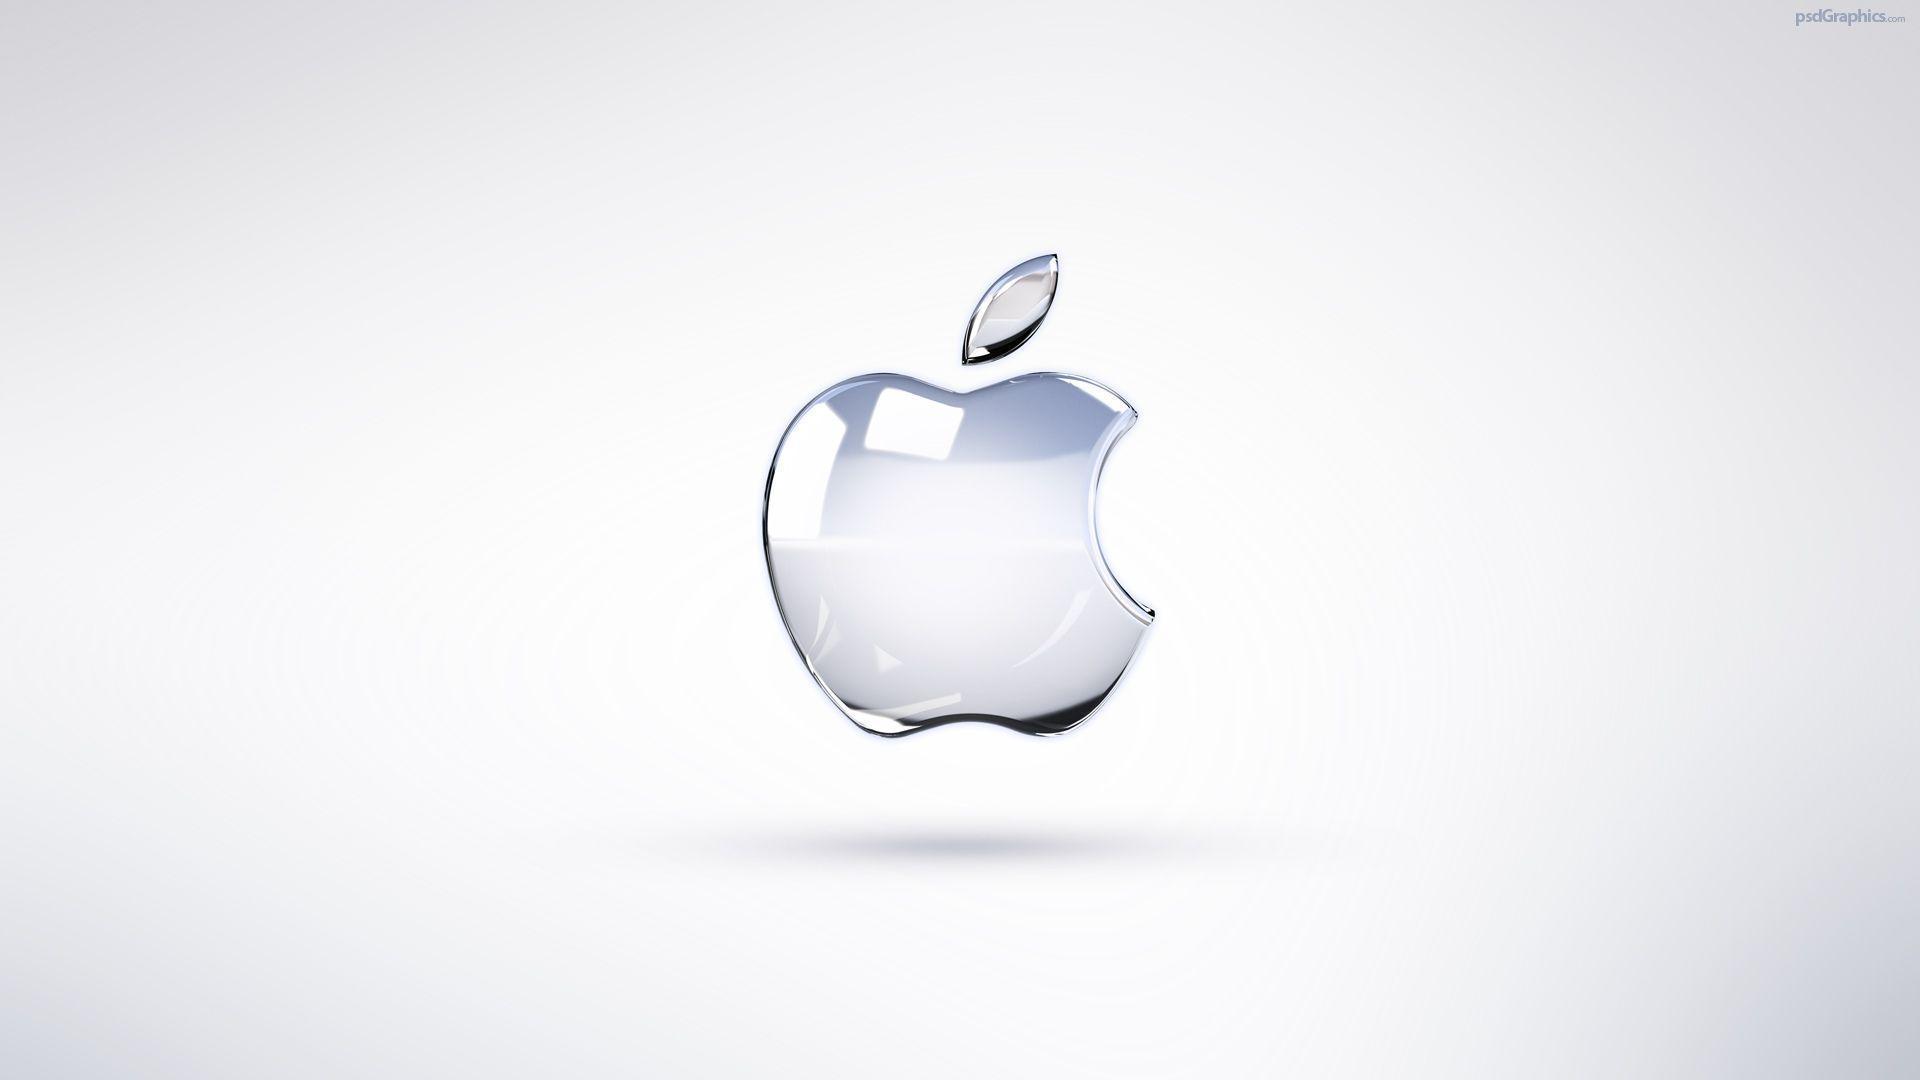 Glass Apple wallpaper and image, picture, photo